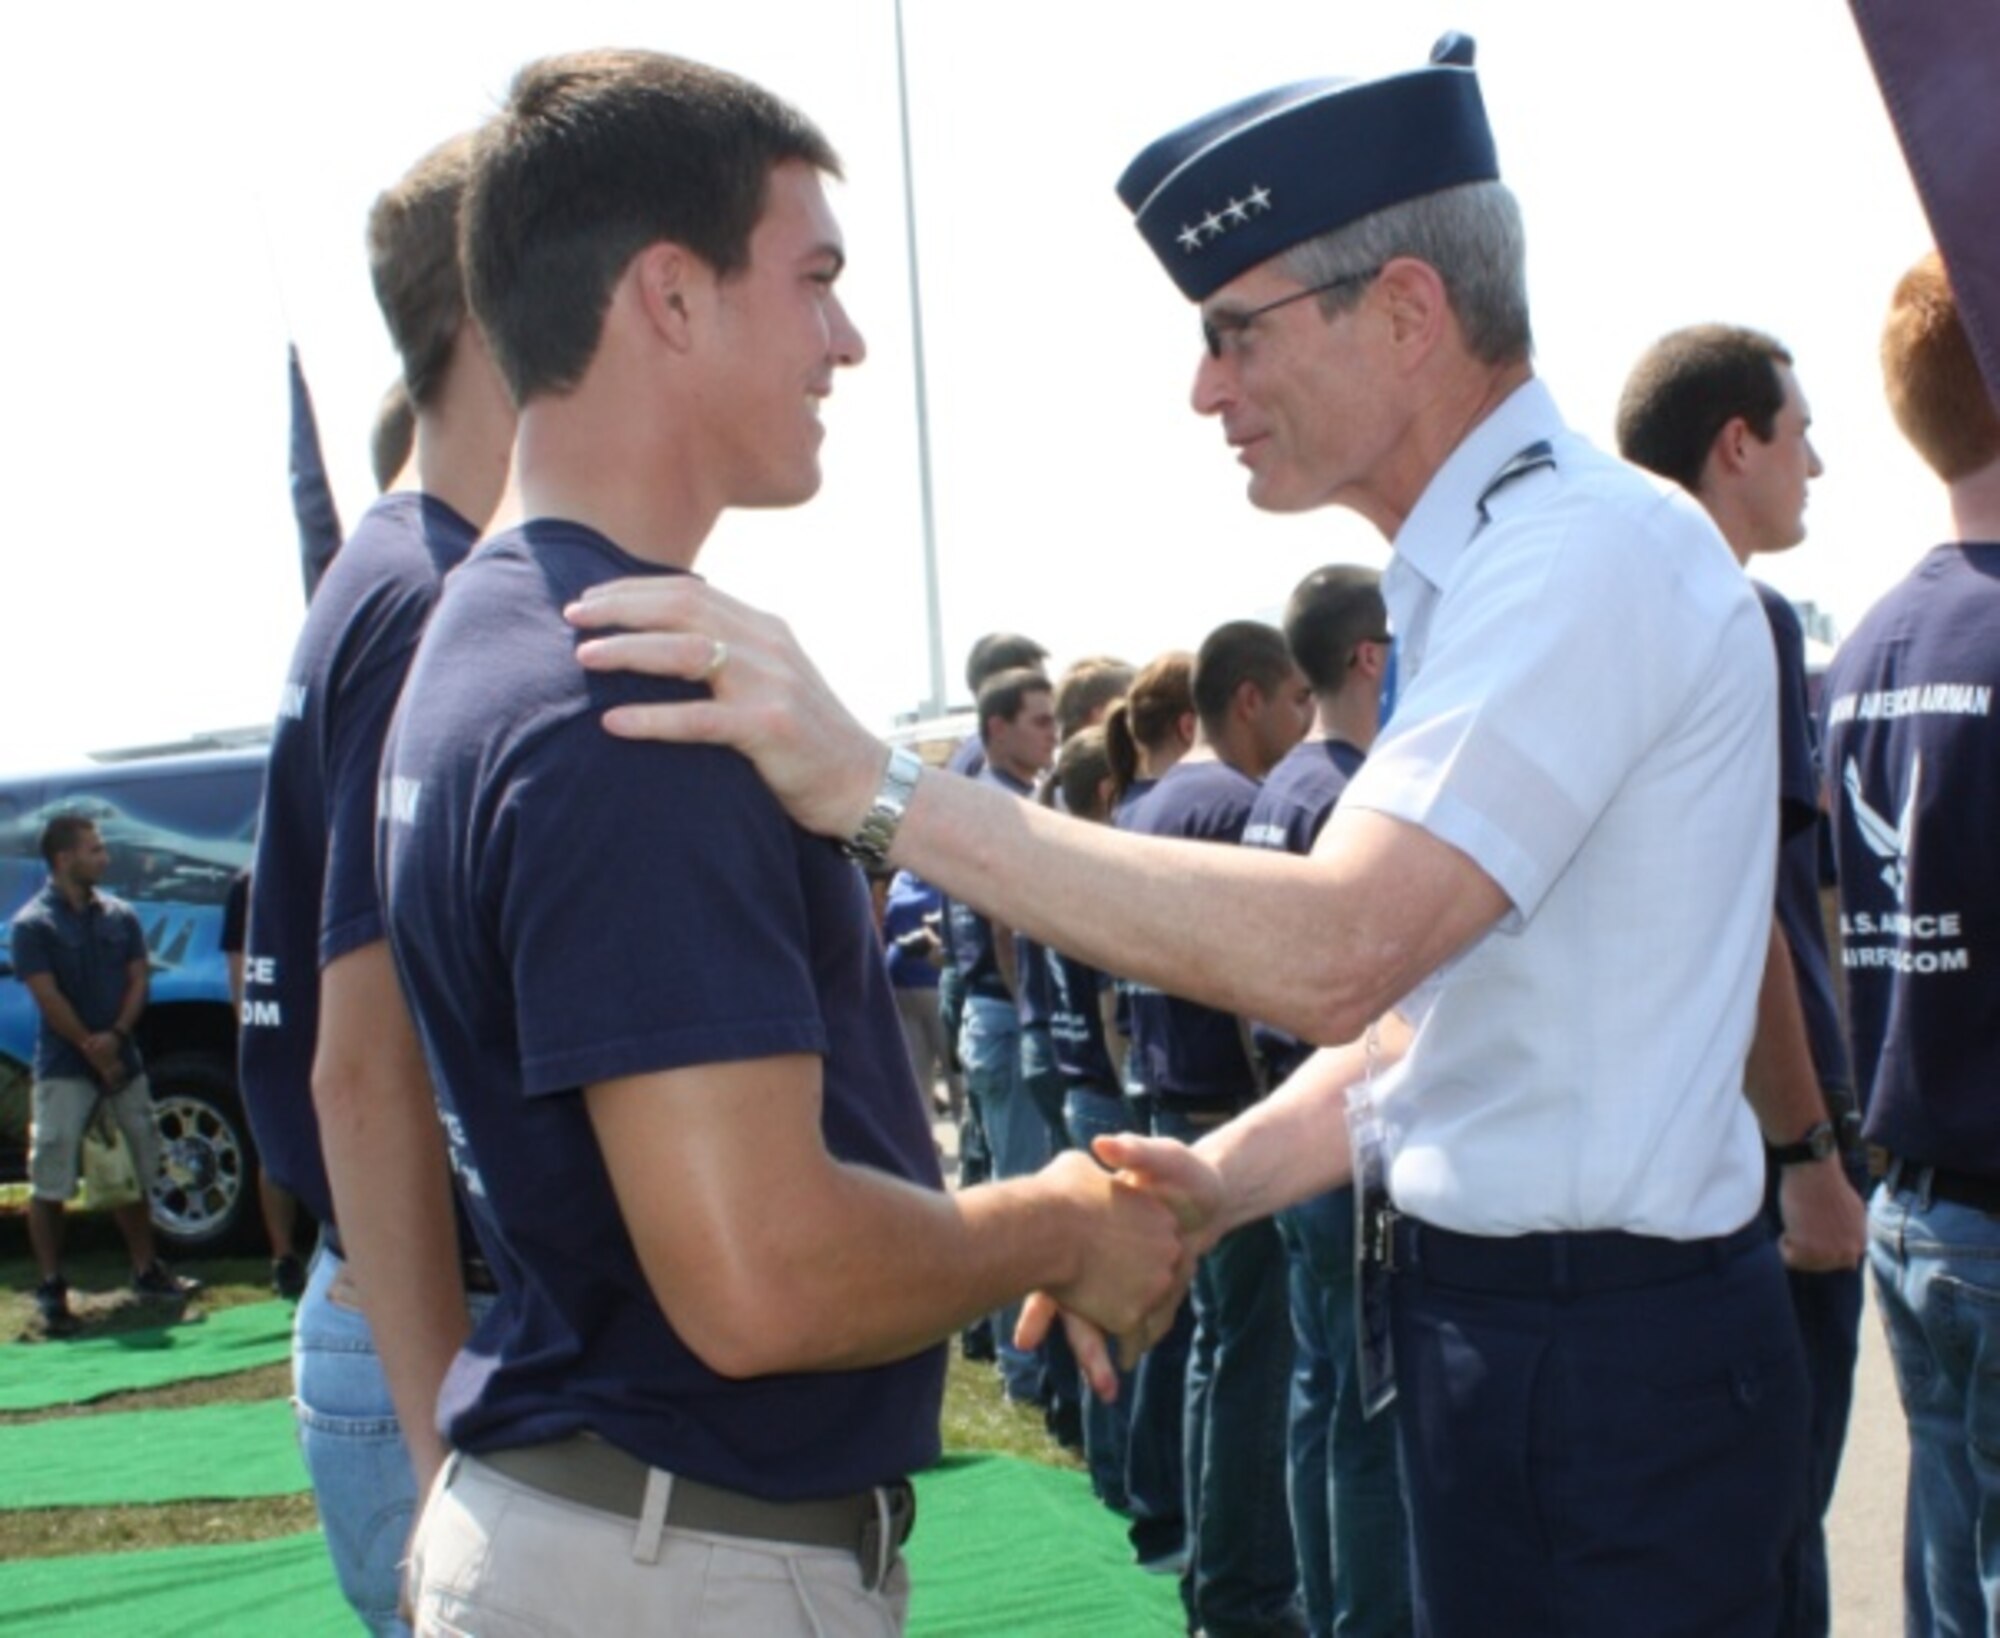 Air Force Chief of Staff Gen. Norton Schwartz shakes hands with delayed enlistment members after administering  the oath of enlistment July 2, 2011, at the Coke Zero 400 in Daytona Beach, Fla. (U.S. Air Force photo/Capt. Maggie M. Silva)